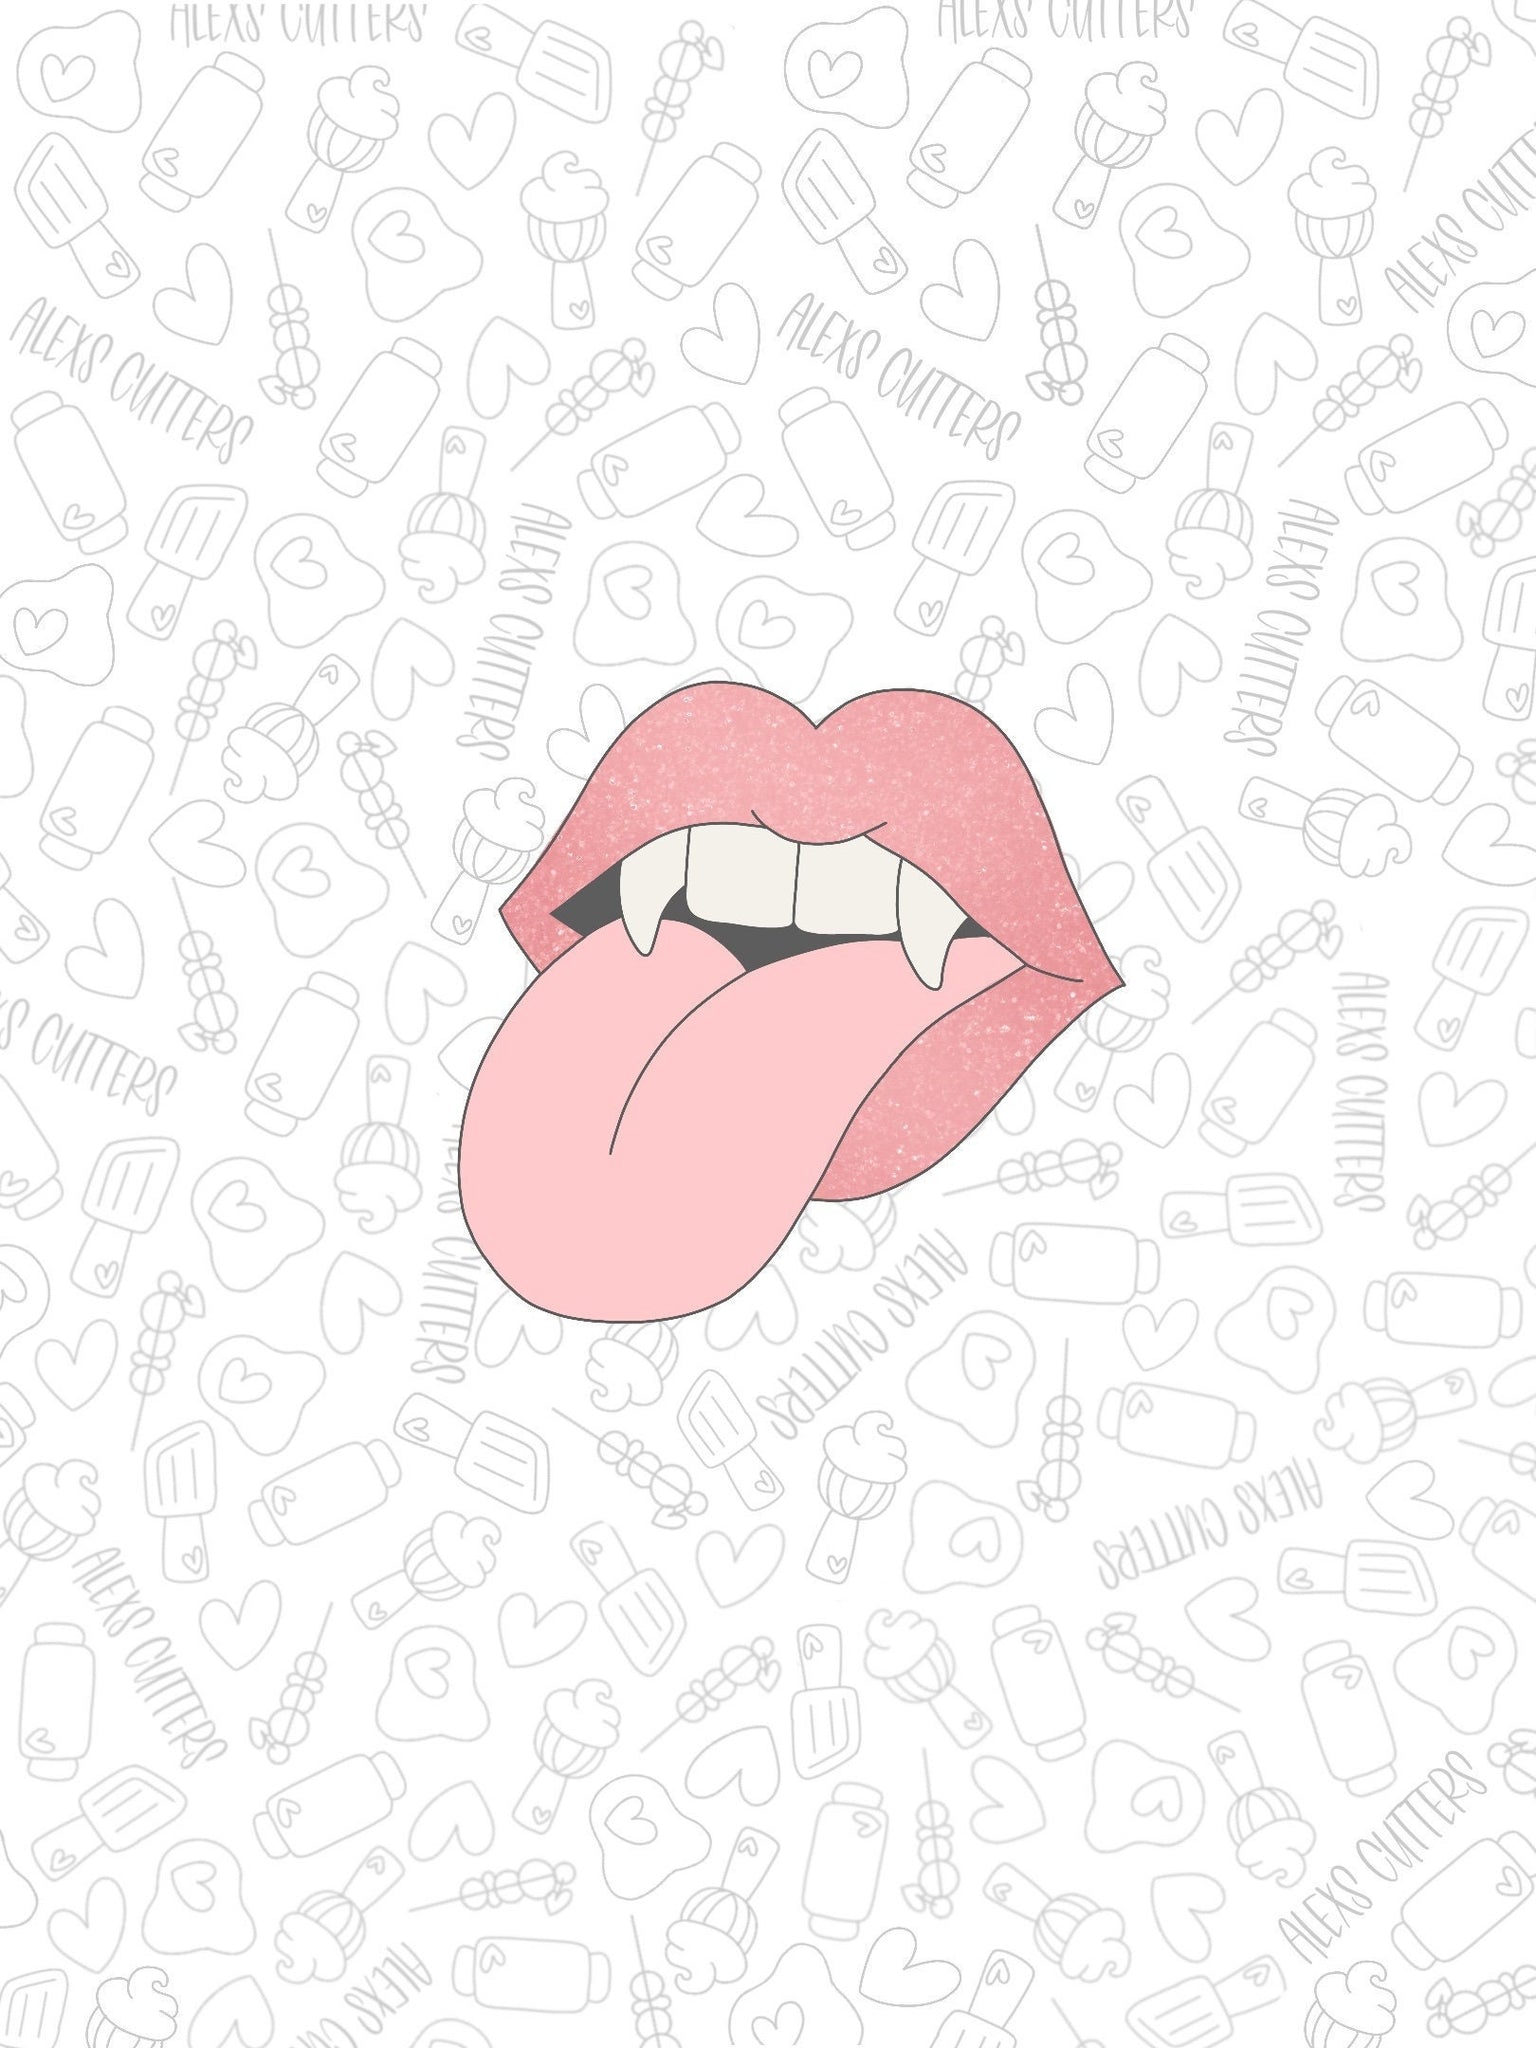 The tongue is drawn in a cartoon style - Vampire